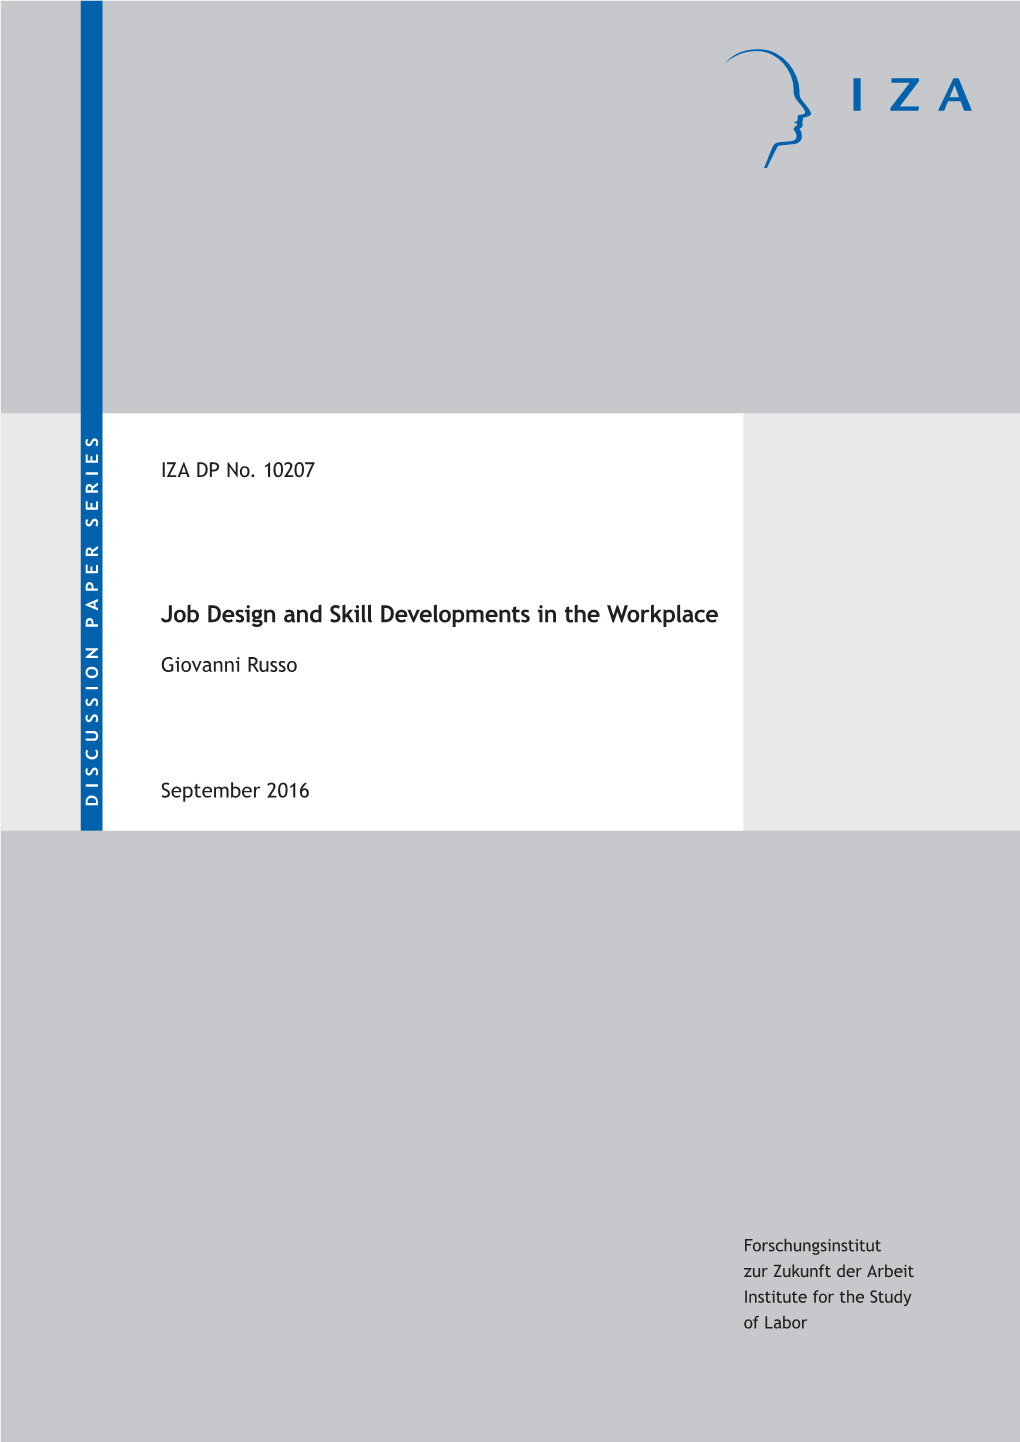 Job Design and Skill Developments in the Workplace